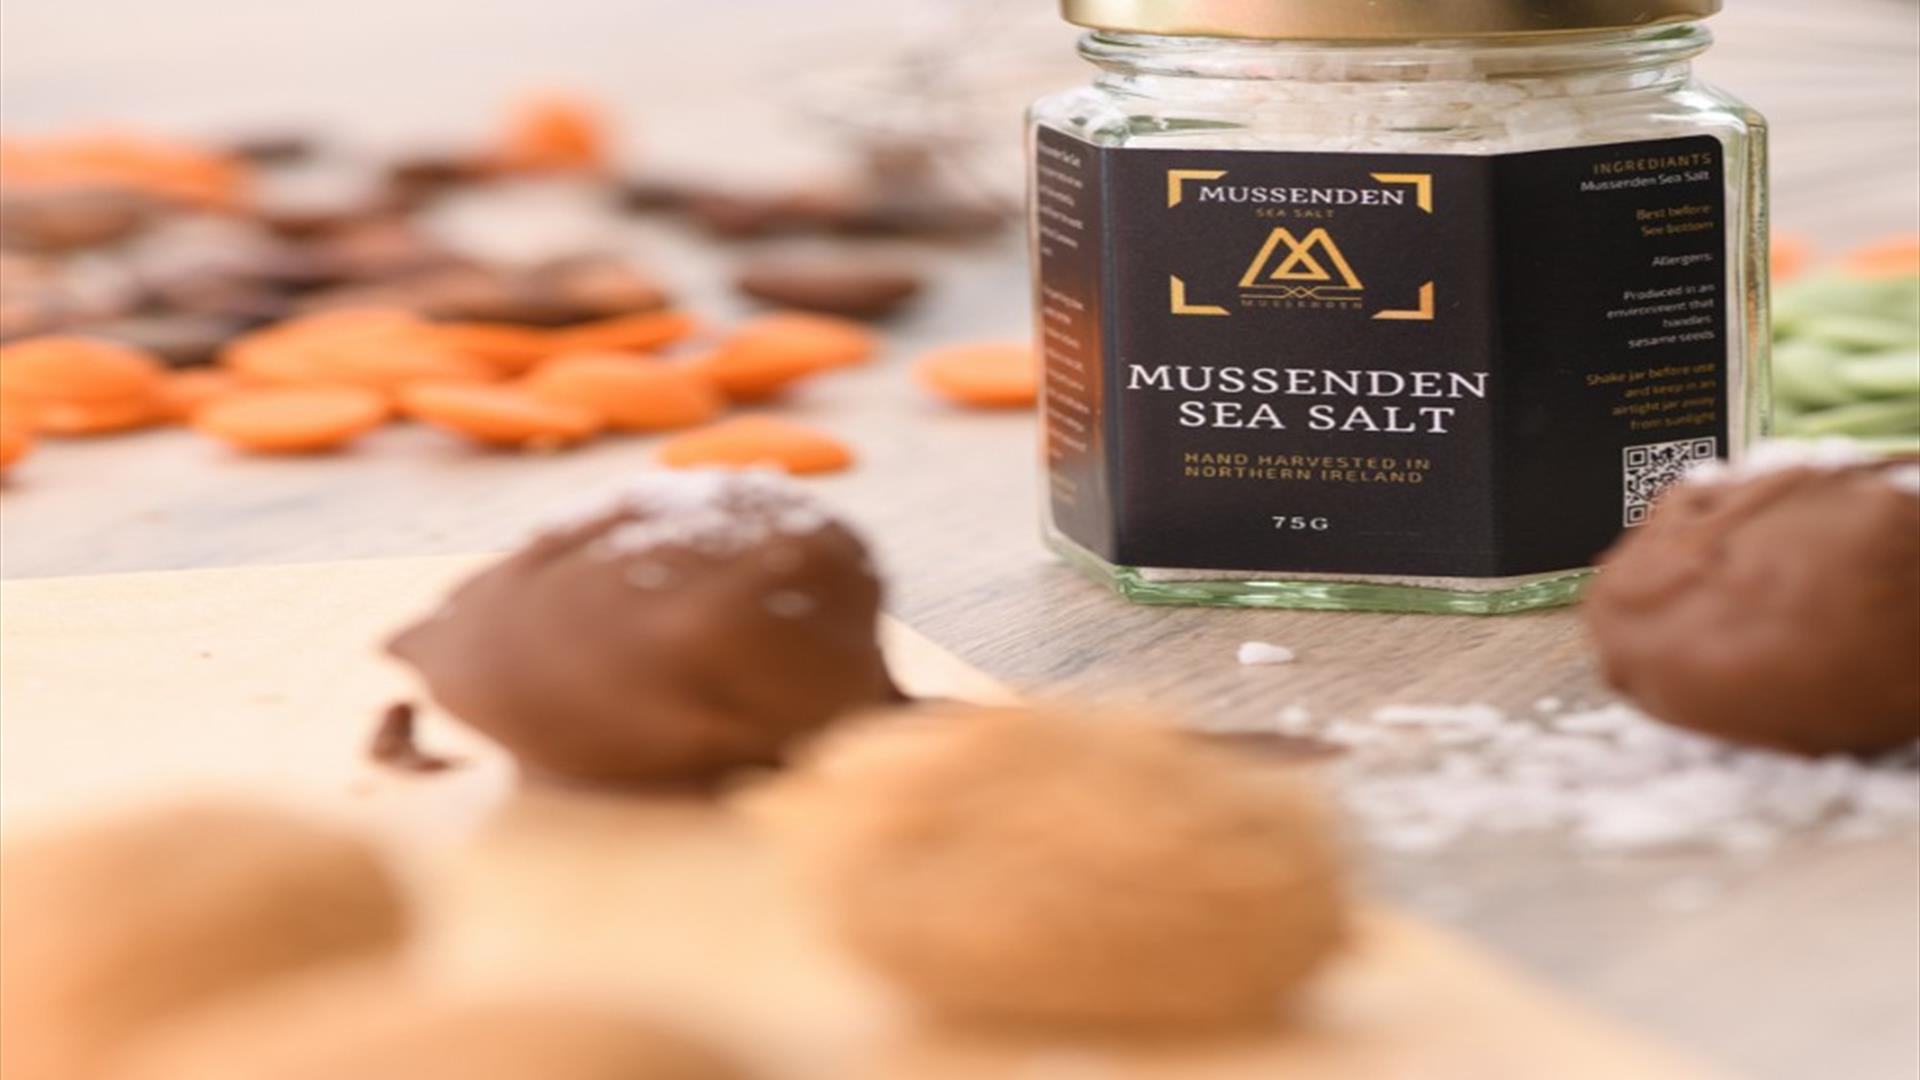 Handmade chocolates in the foreground with a jar of Mussenden Sea Salt in the background